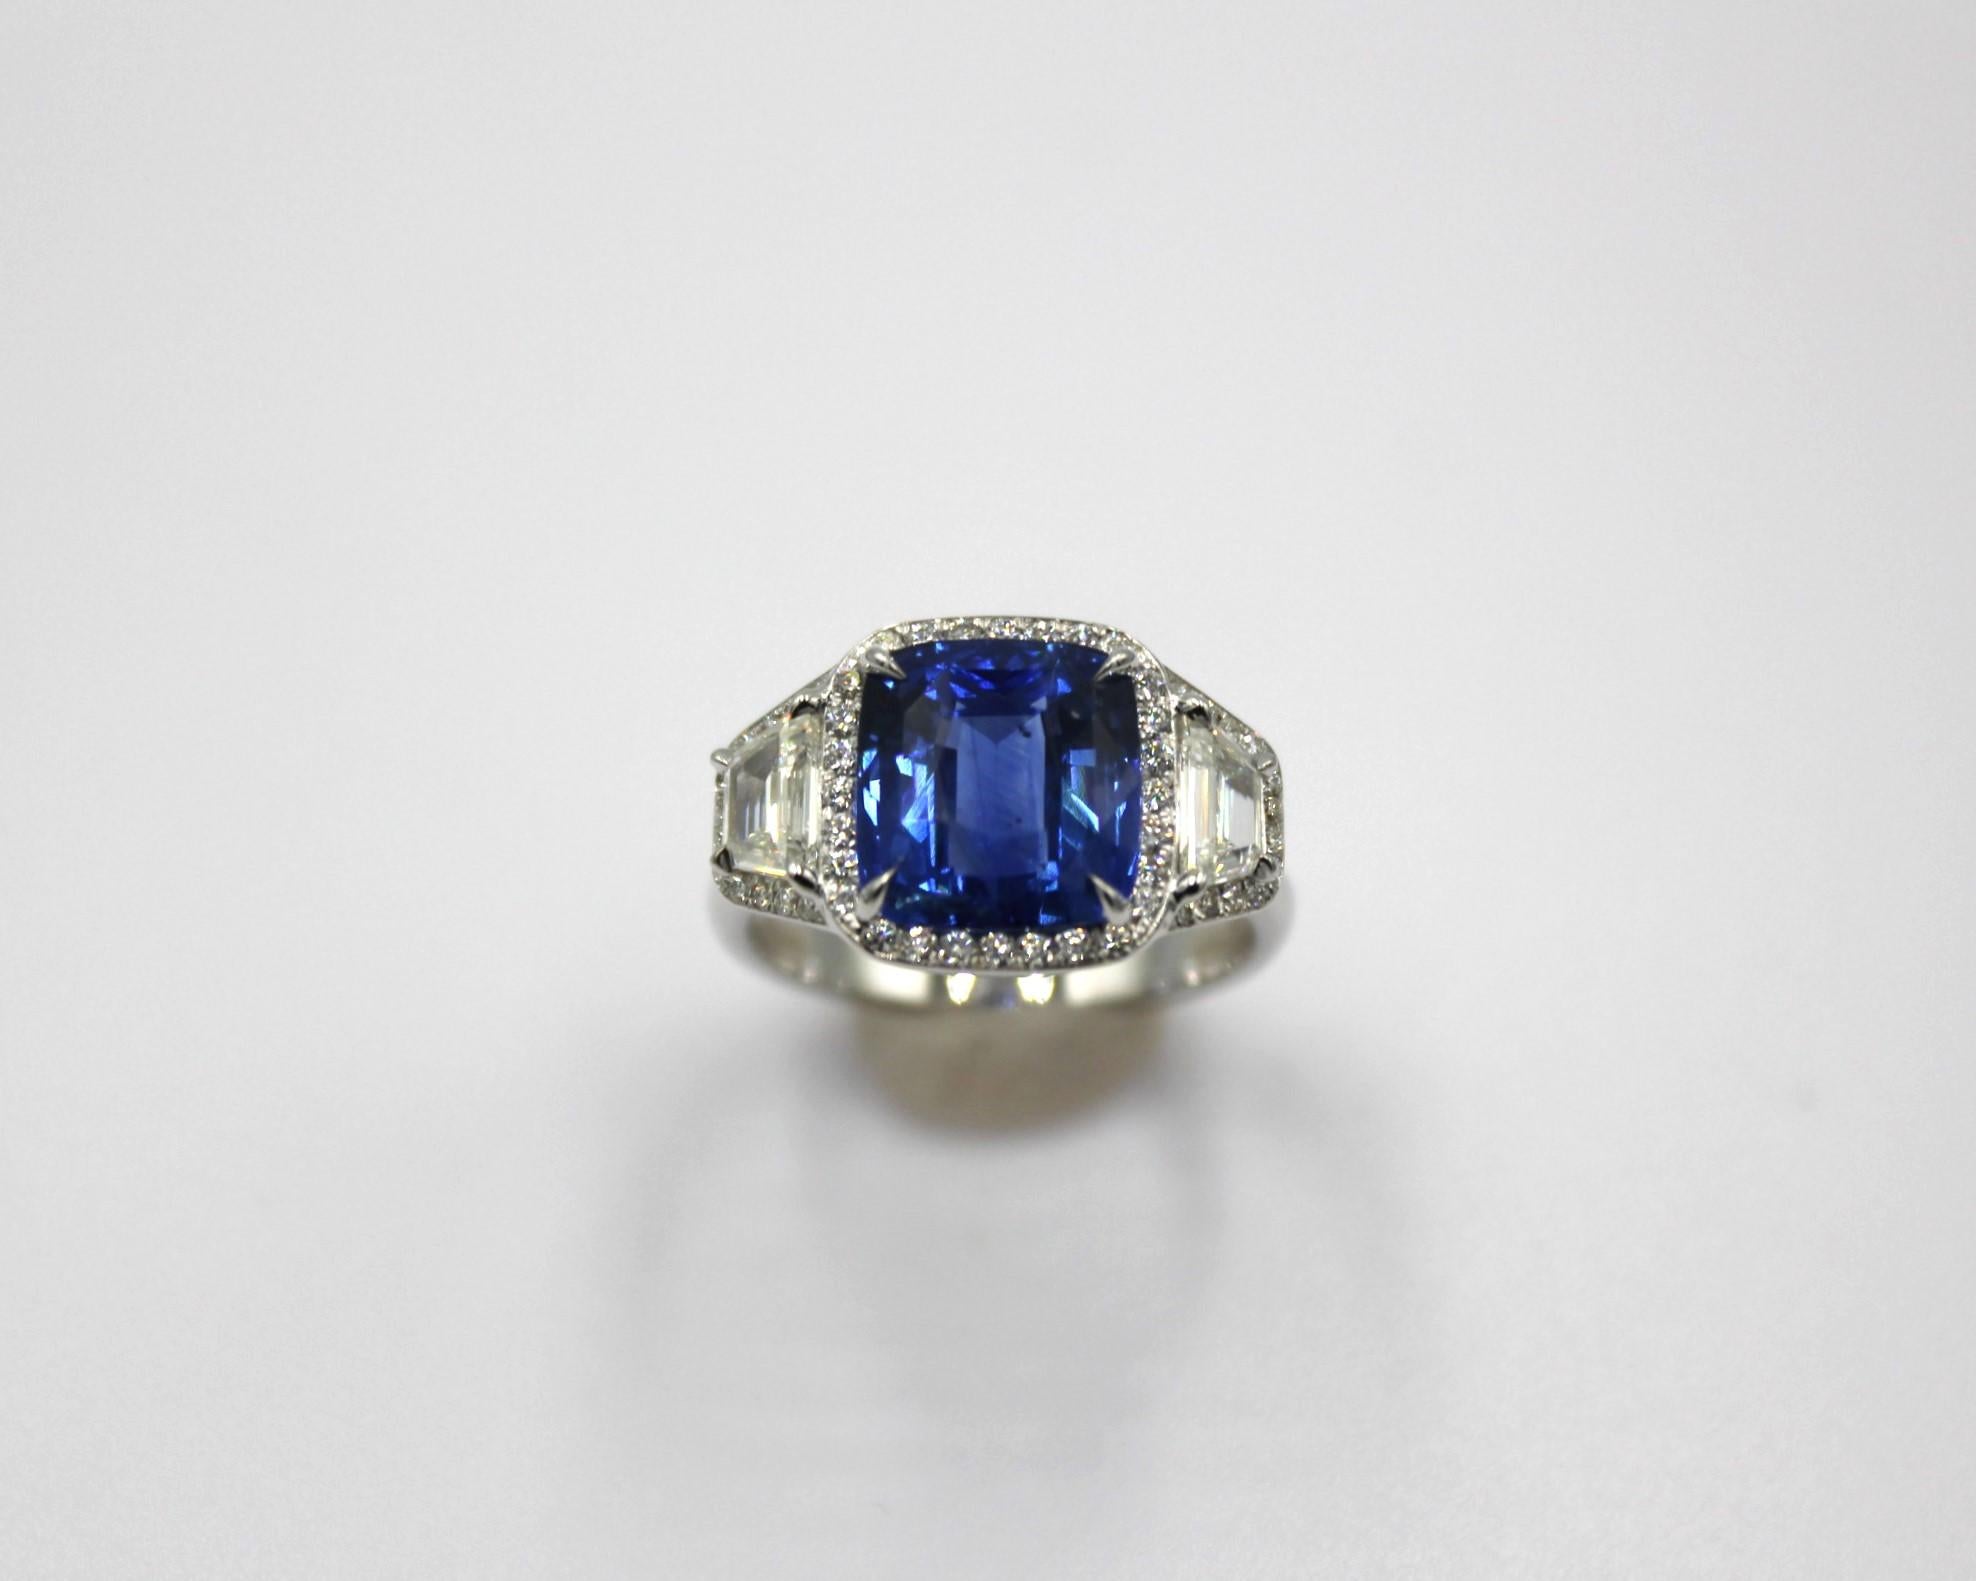 5.29 carats cushion cut Ceylon Sapphire, framed with 44 round diamonds and 2 trapezoid shaped diamonds, totaling a diamond weight of 1.04 carats. 

This stunning Sapphire Diamond Ring will highlight your elegance and uniqueness. 

Item Details:
-